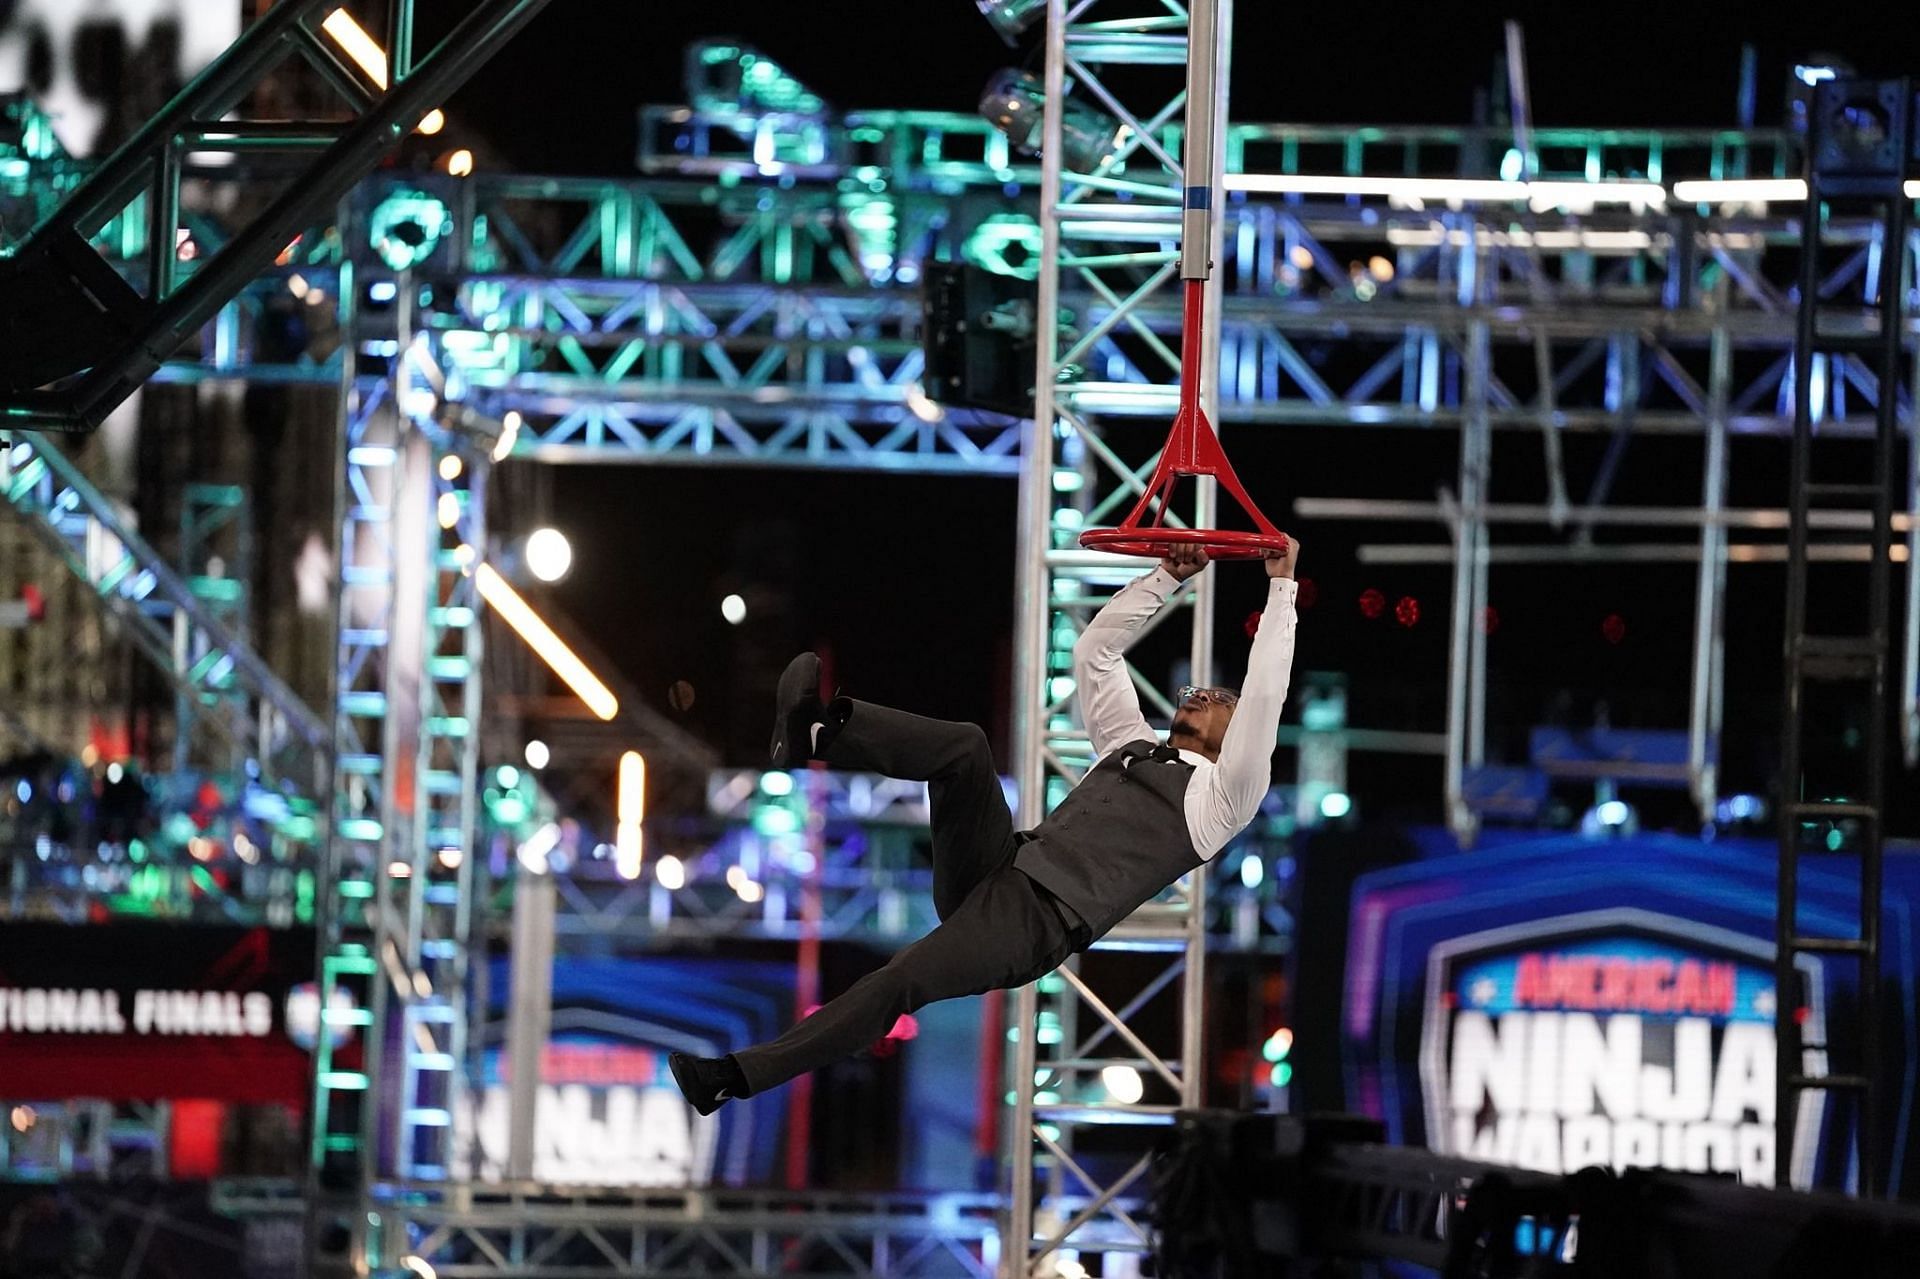 A participant tries to overcome an obstacle in ANW (Image via Facebook/@ninjawarrior)